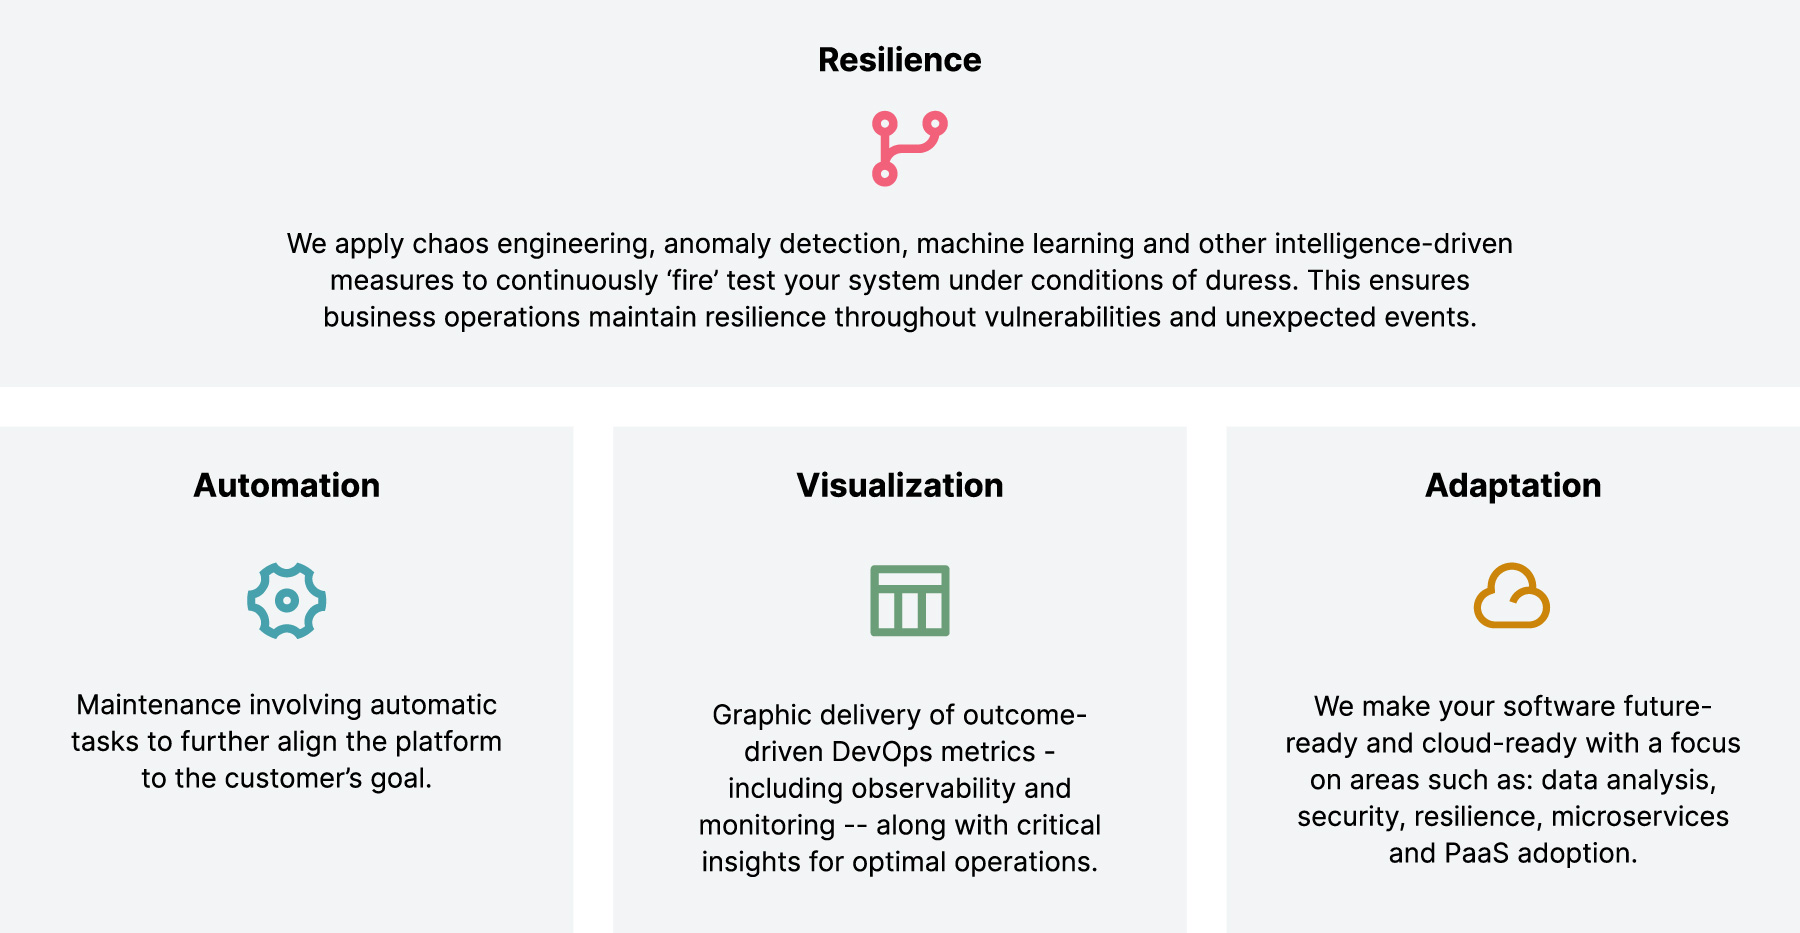 Digital Operations Services: Automation, Visualization, Adaptation and Resilience (chaos engineering, anomaly detection, machine learning) to continuously 'fire' test your system under conditions of duress.